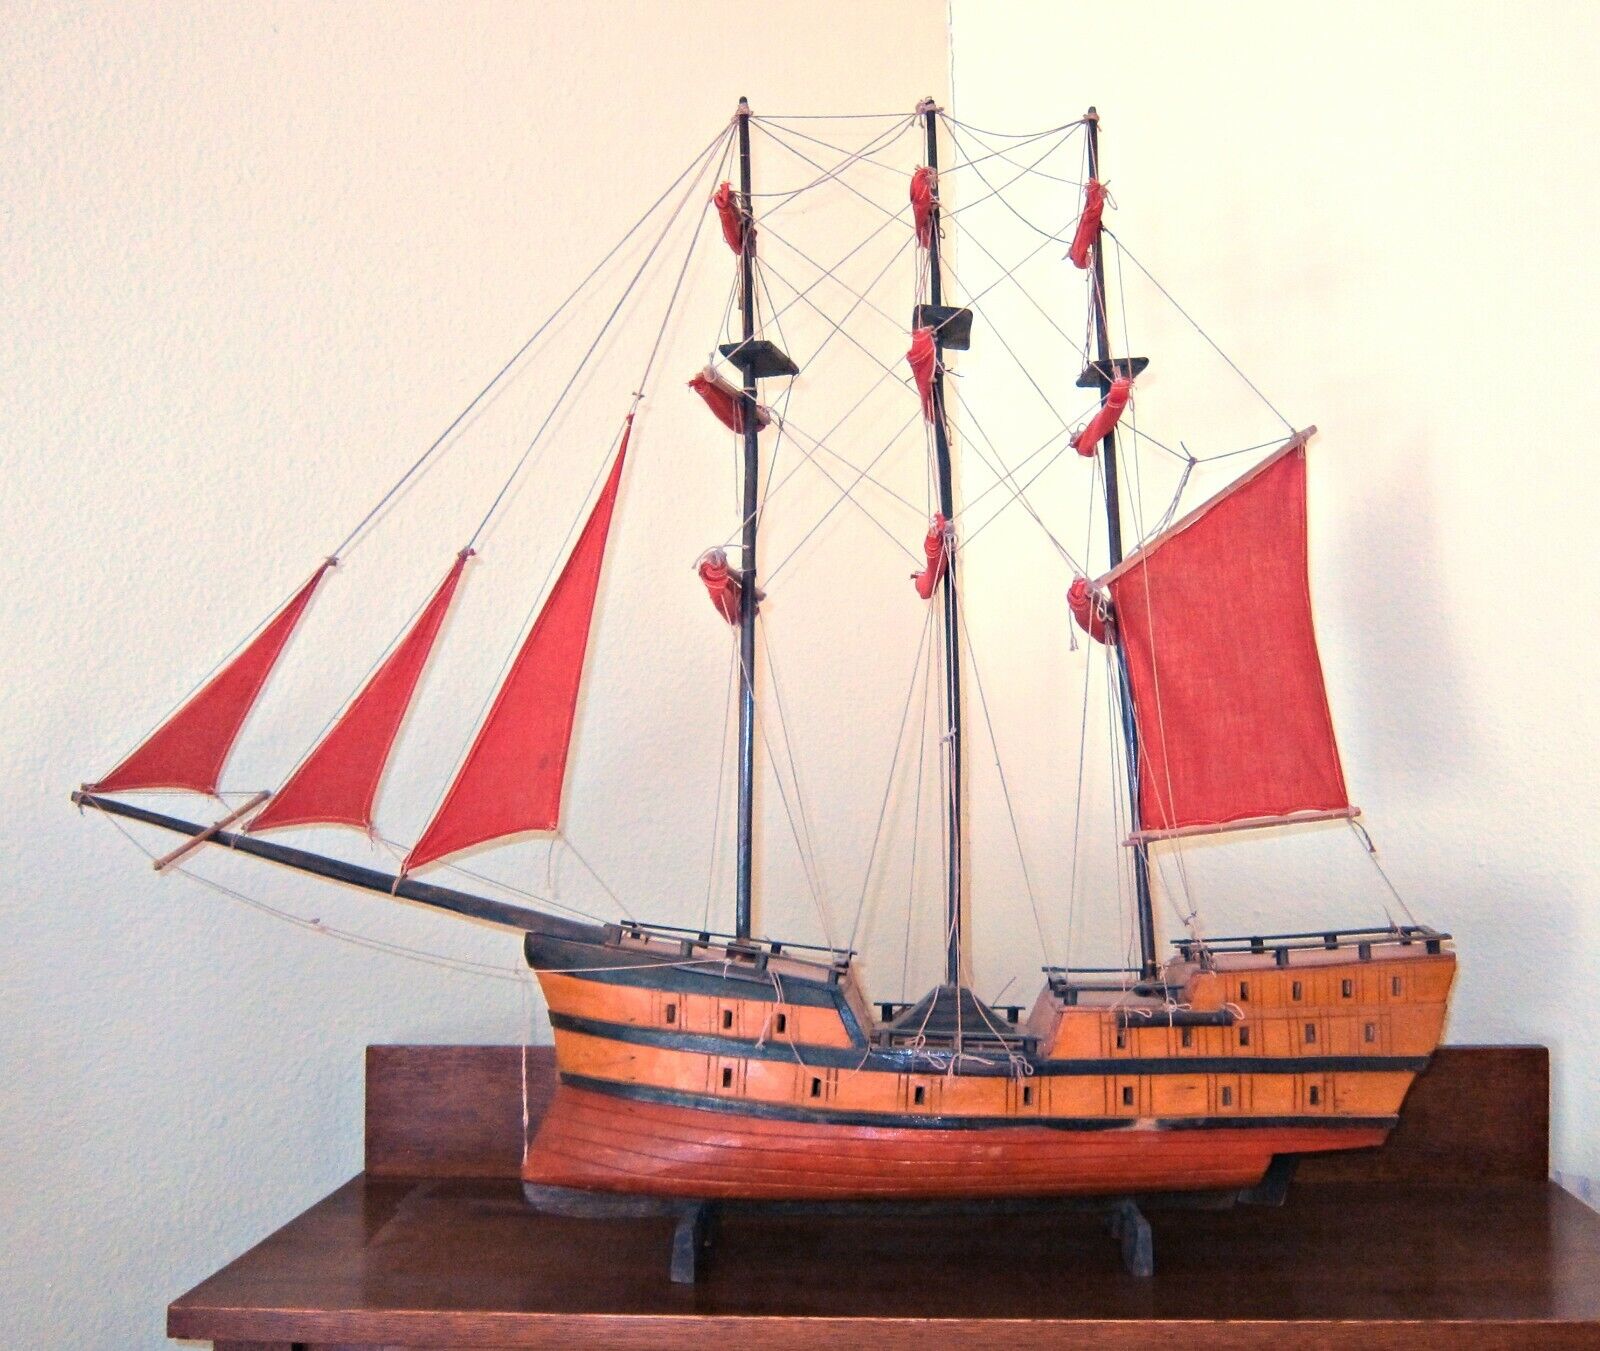 Old Wooden Ship Model - 3 Masted - Large and Detailed - Local Pickup